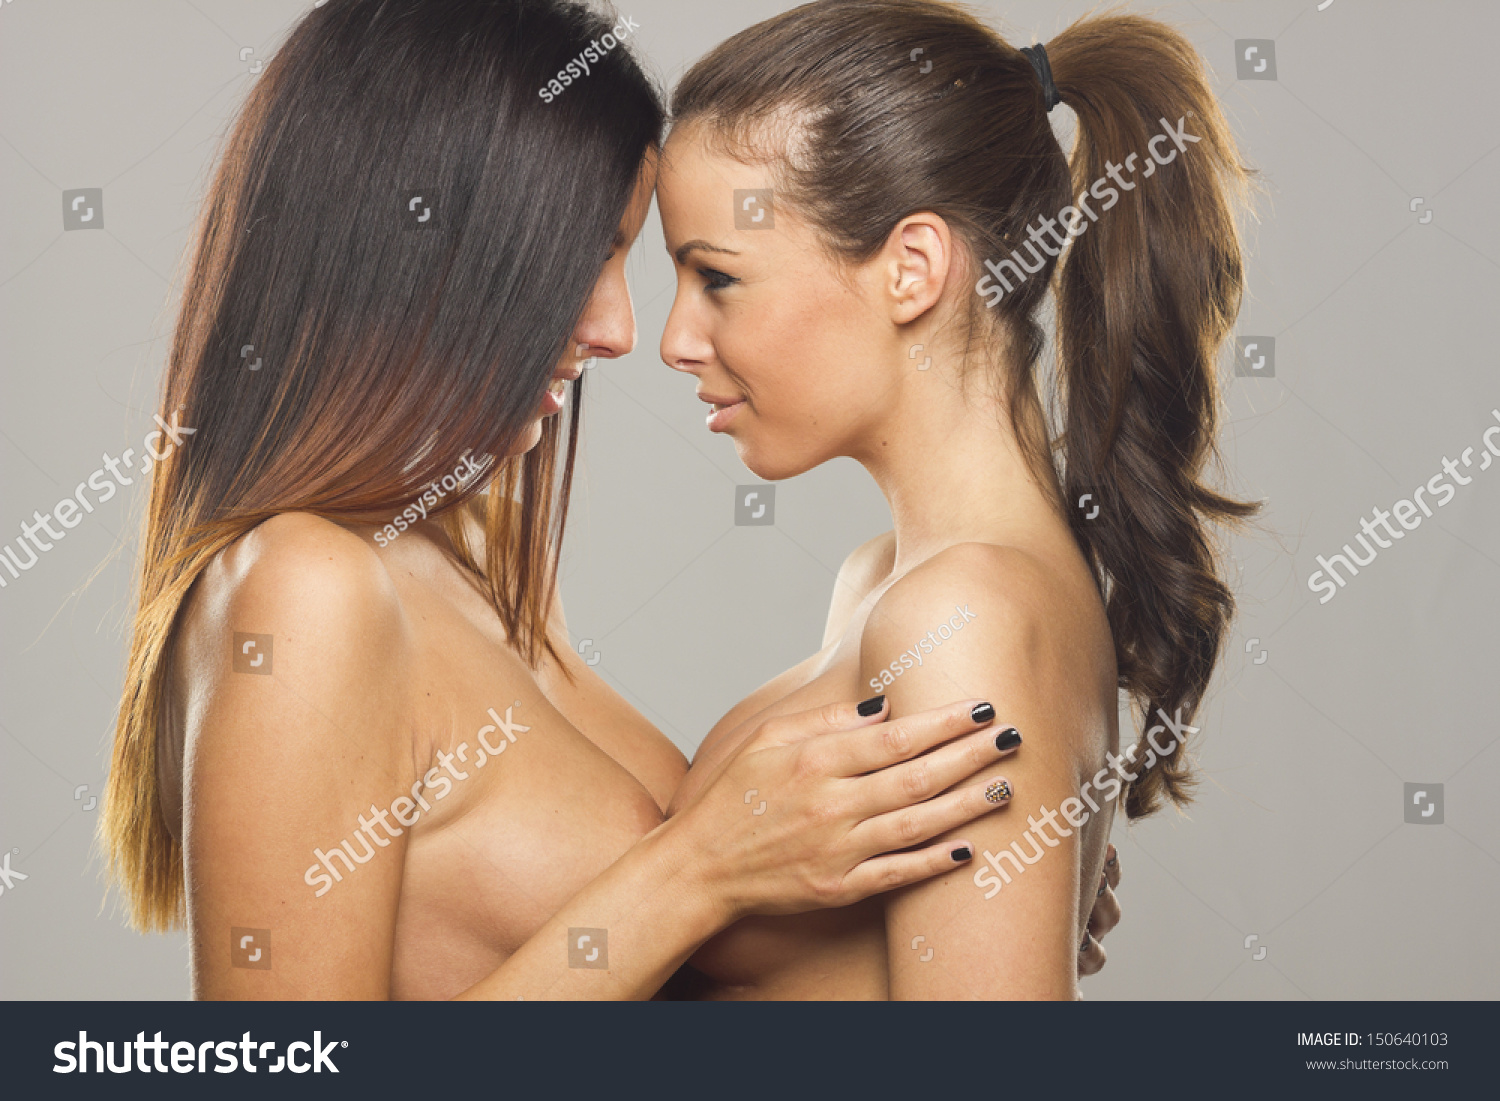 Lesbian Couples Nude